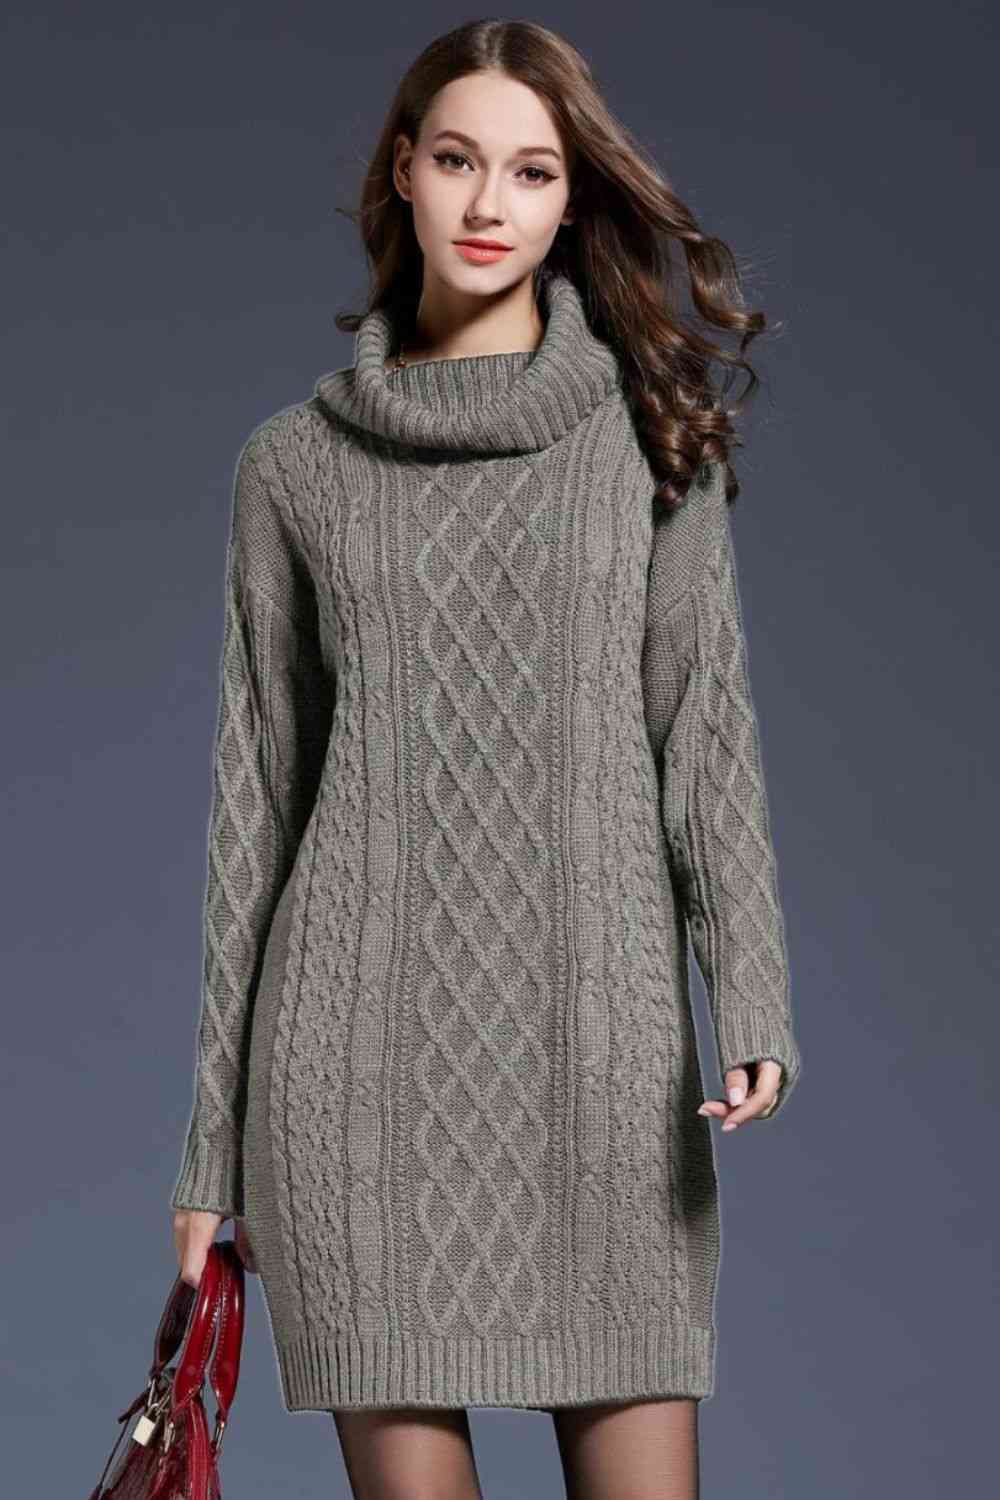 Woven Right Full Size Mixed Knit Cowl Neck Dropped Shoulder Sweater Dress Gray